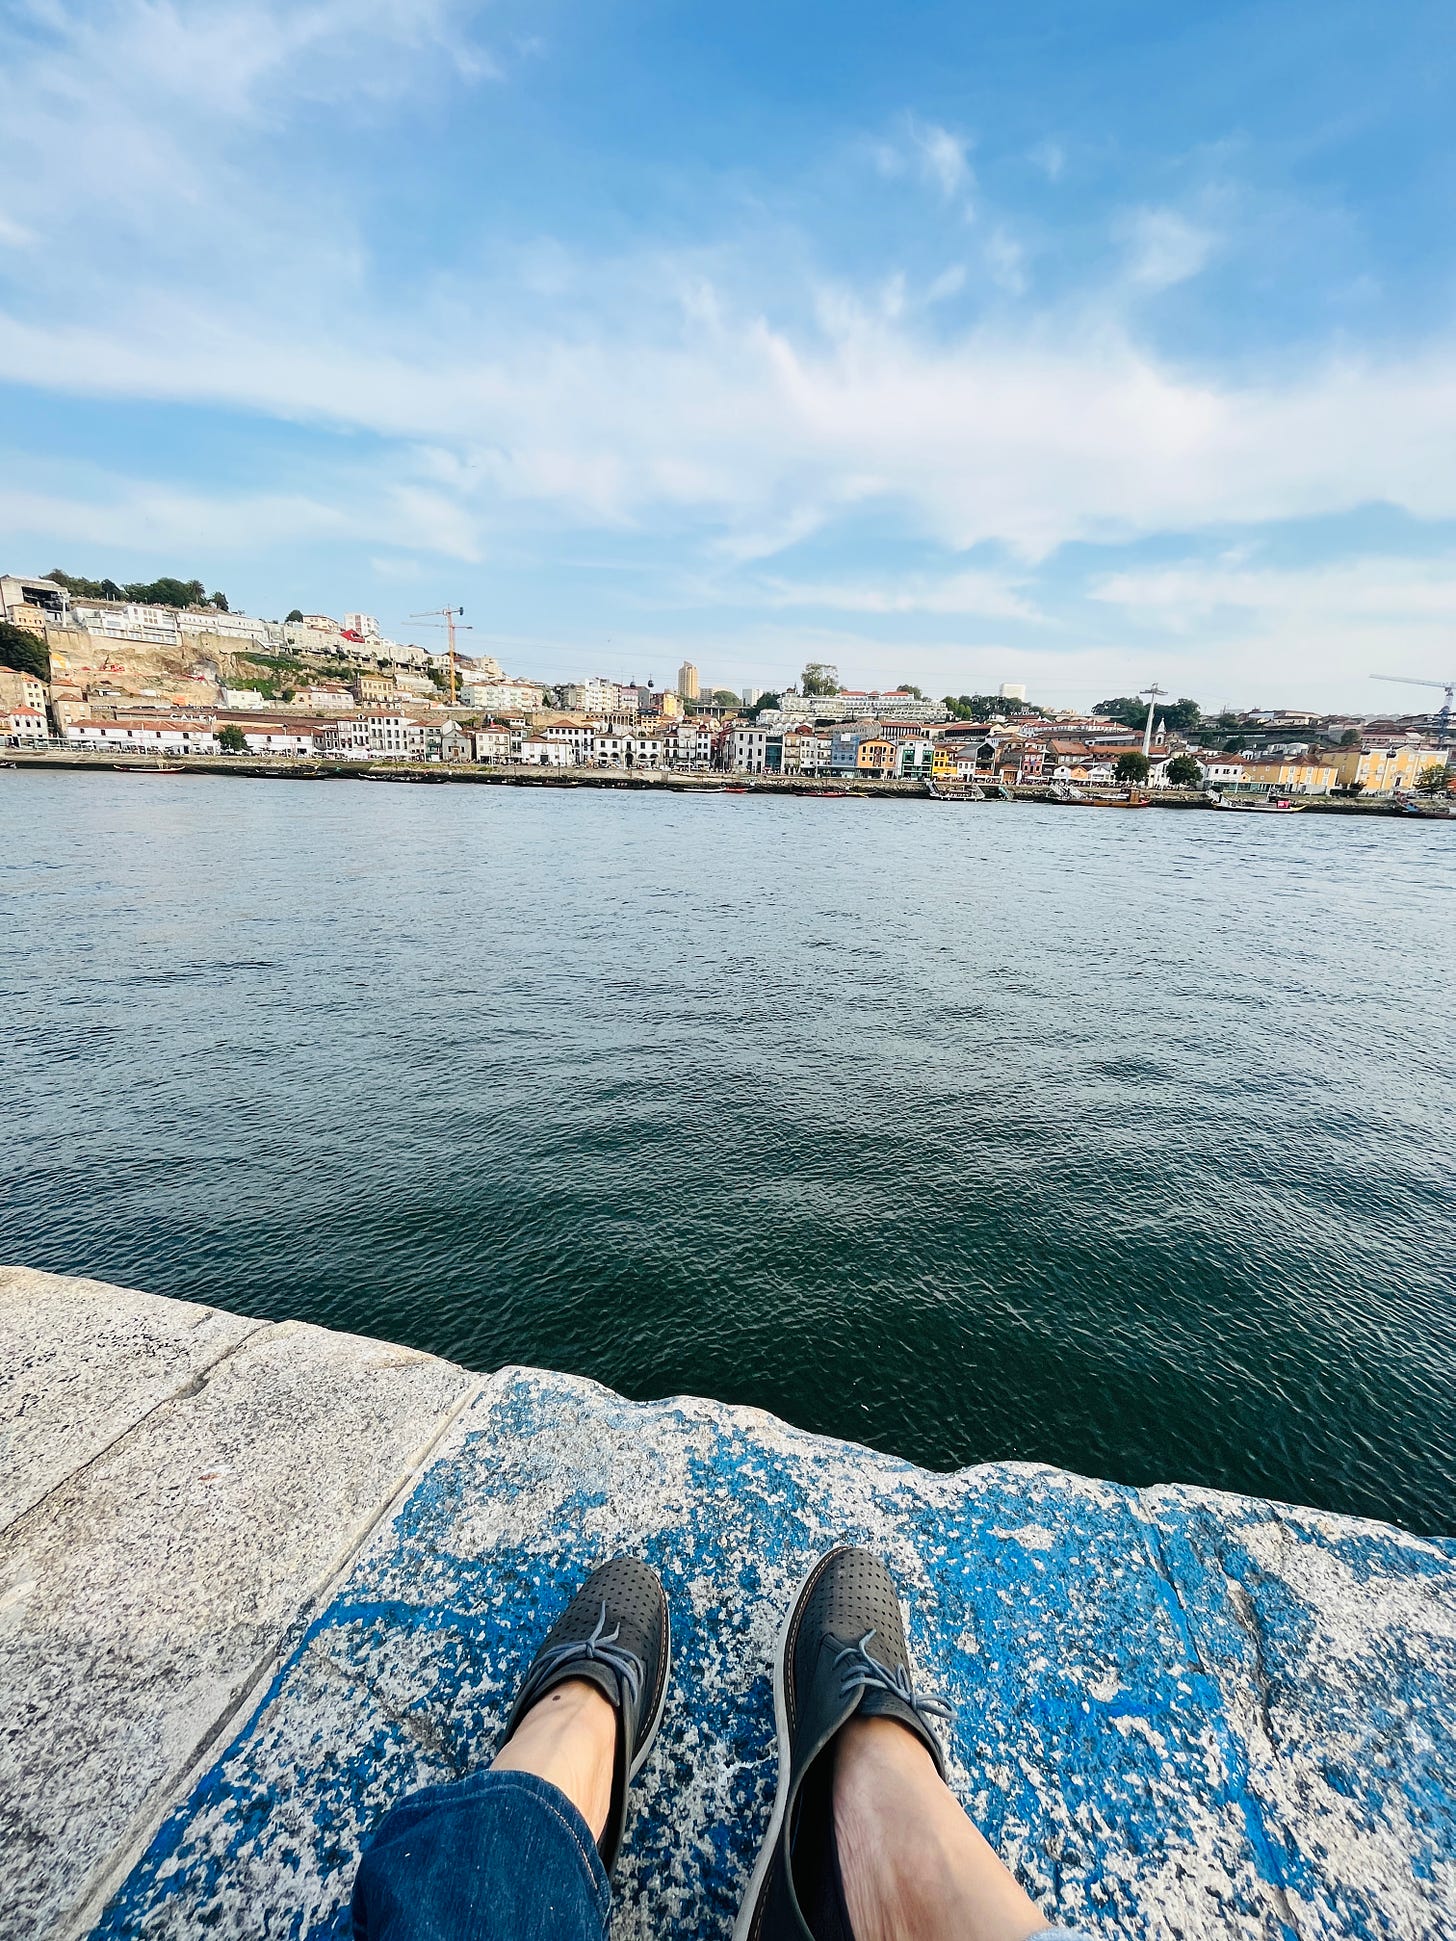 Image: photo of the Duoro river with the Vila Nova de Gaia opposite. In the foreground, there are the writer’s stretched-out feet clad in her trusty Clarks, relaxing in the moment.